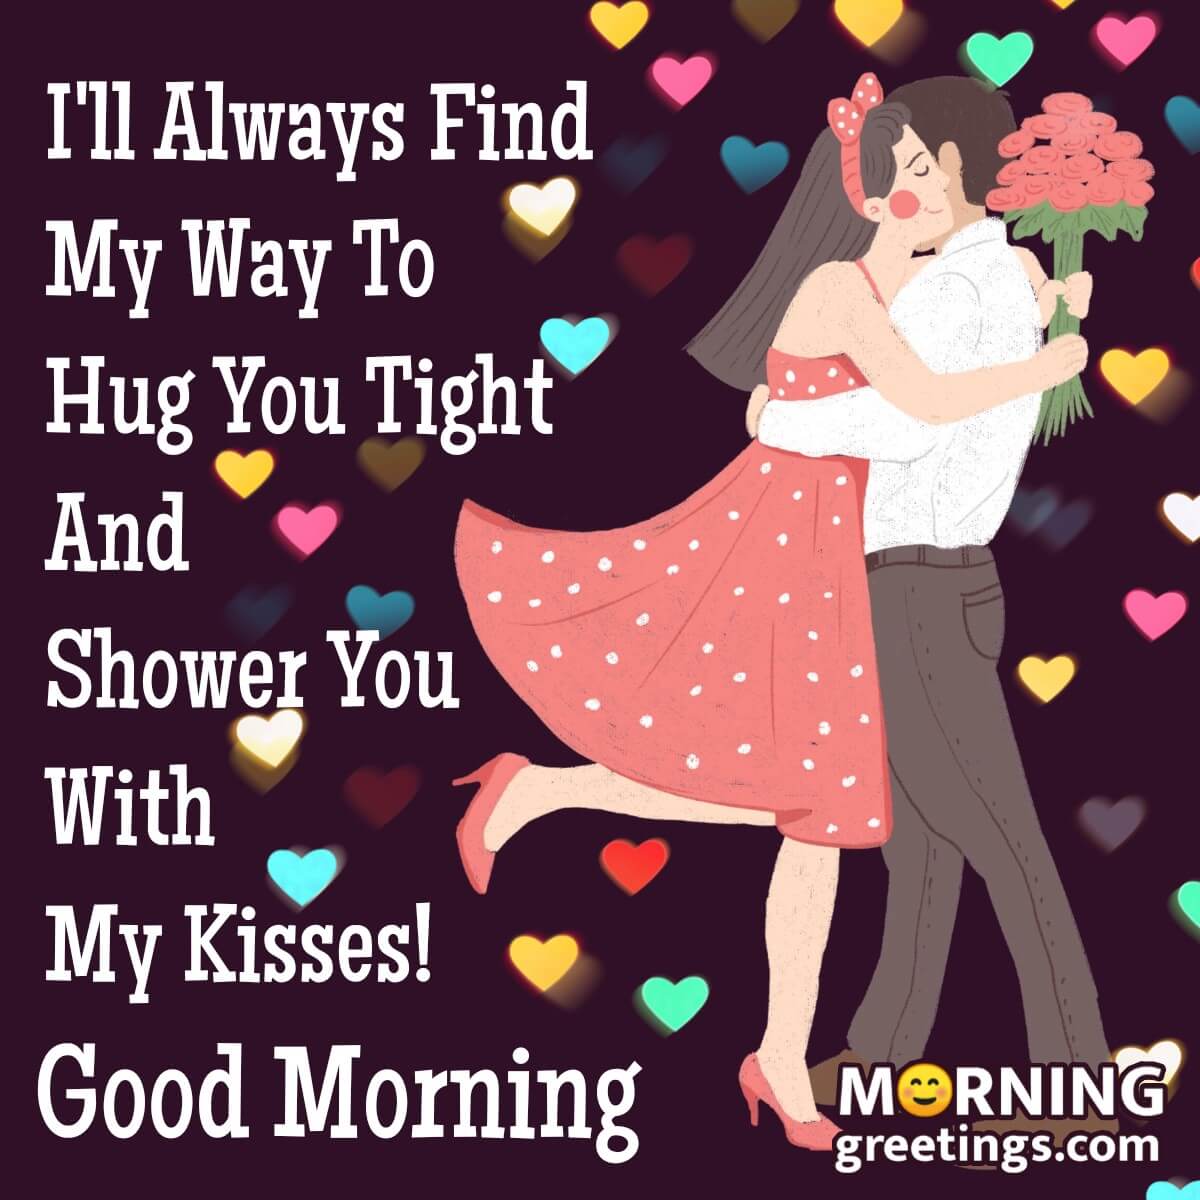 Good Morning Hugs And Kisses To You